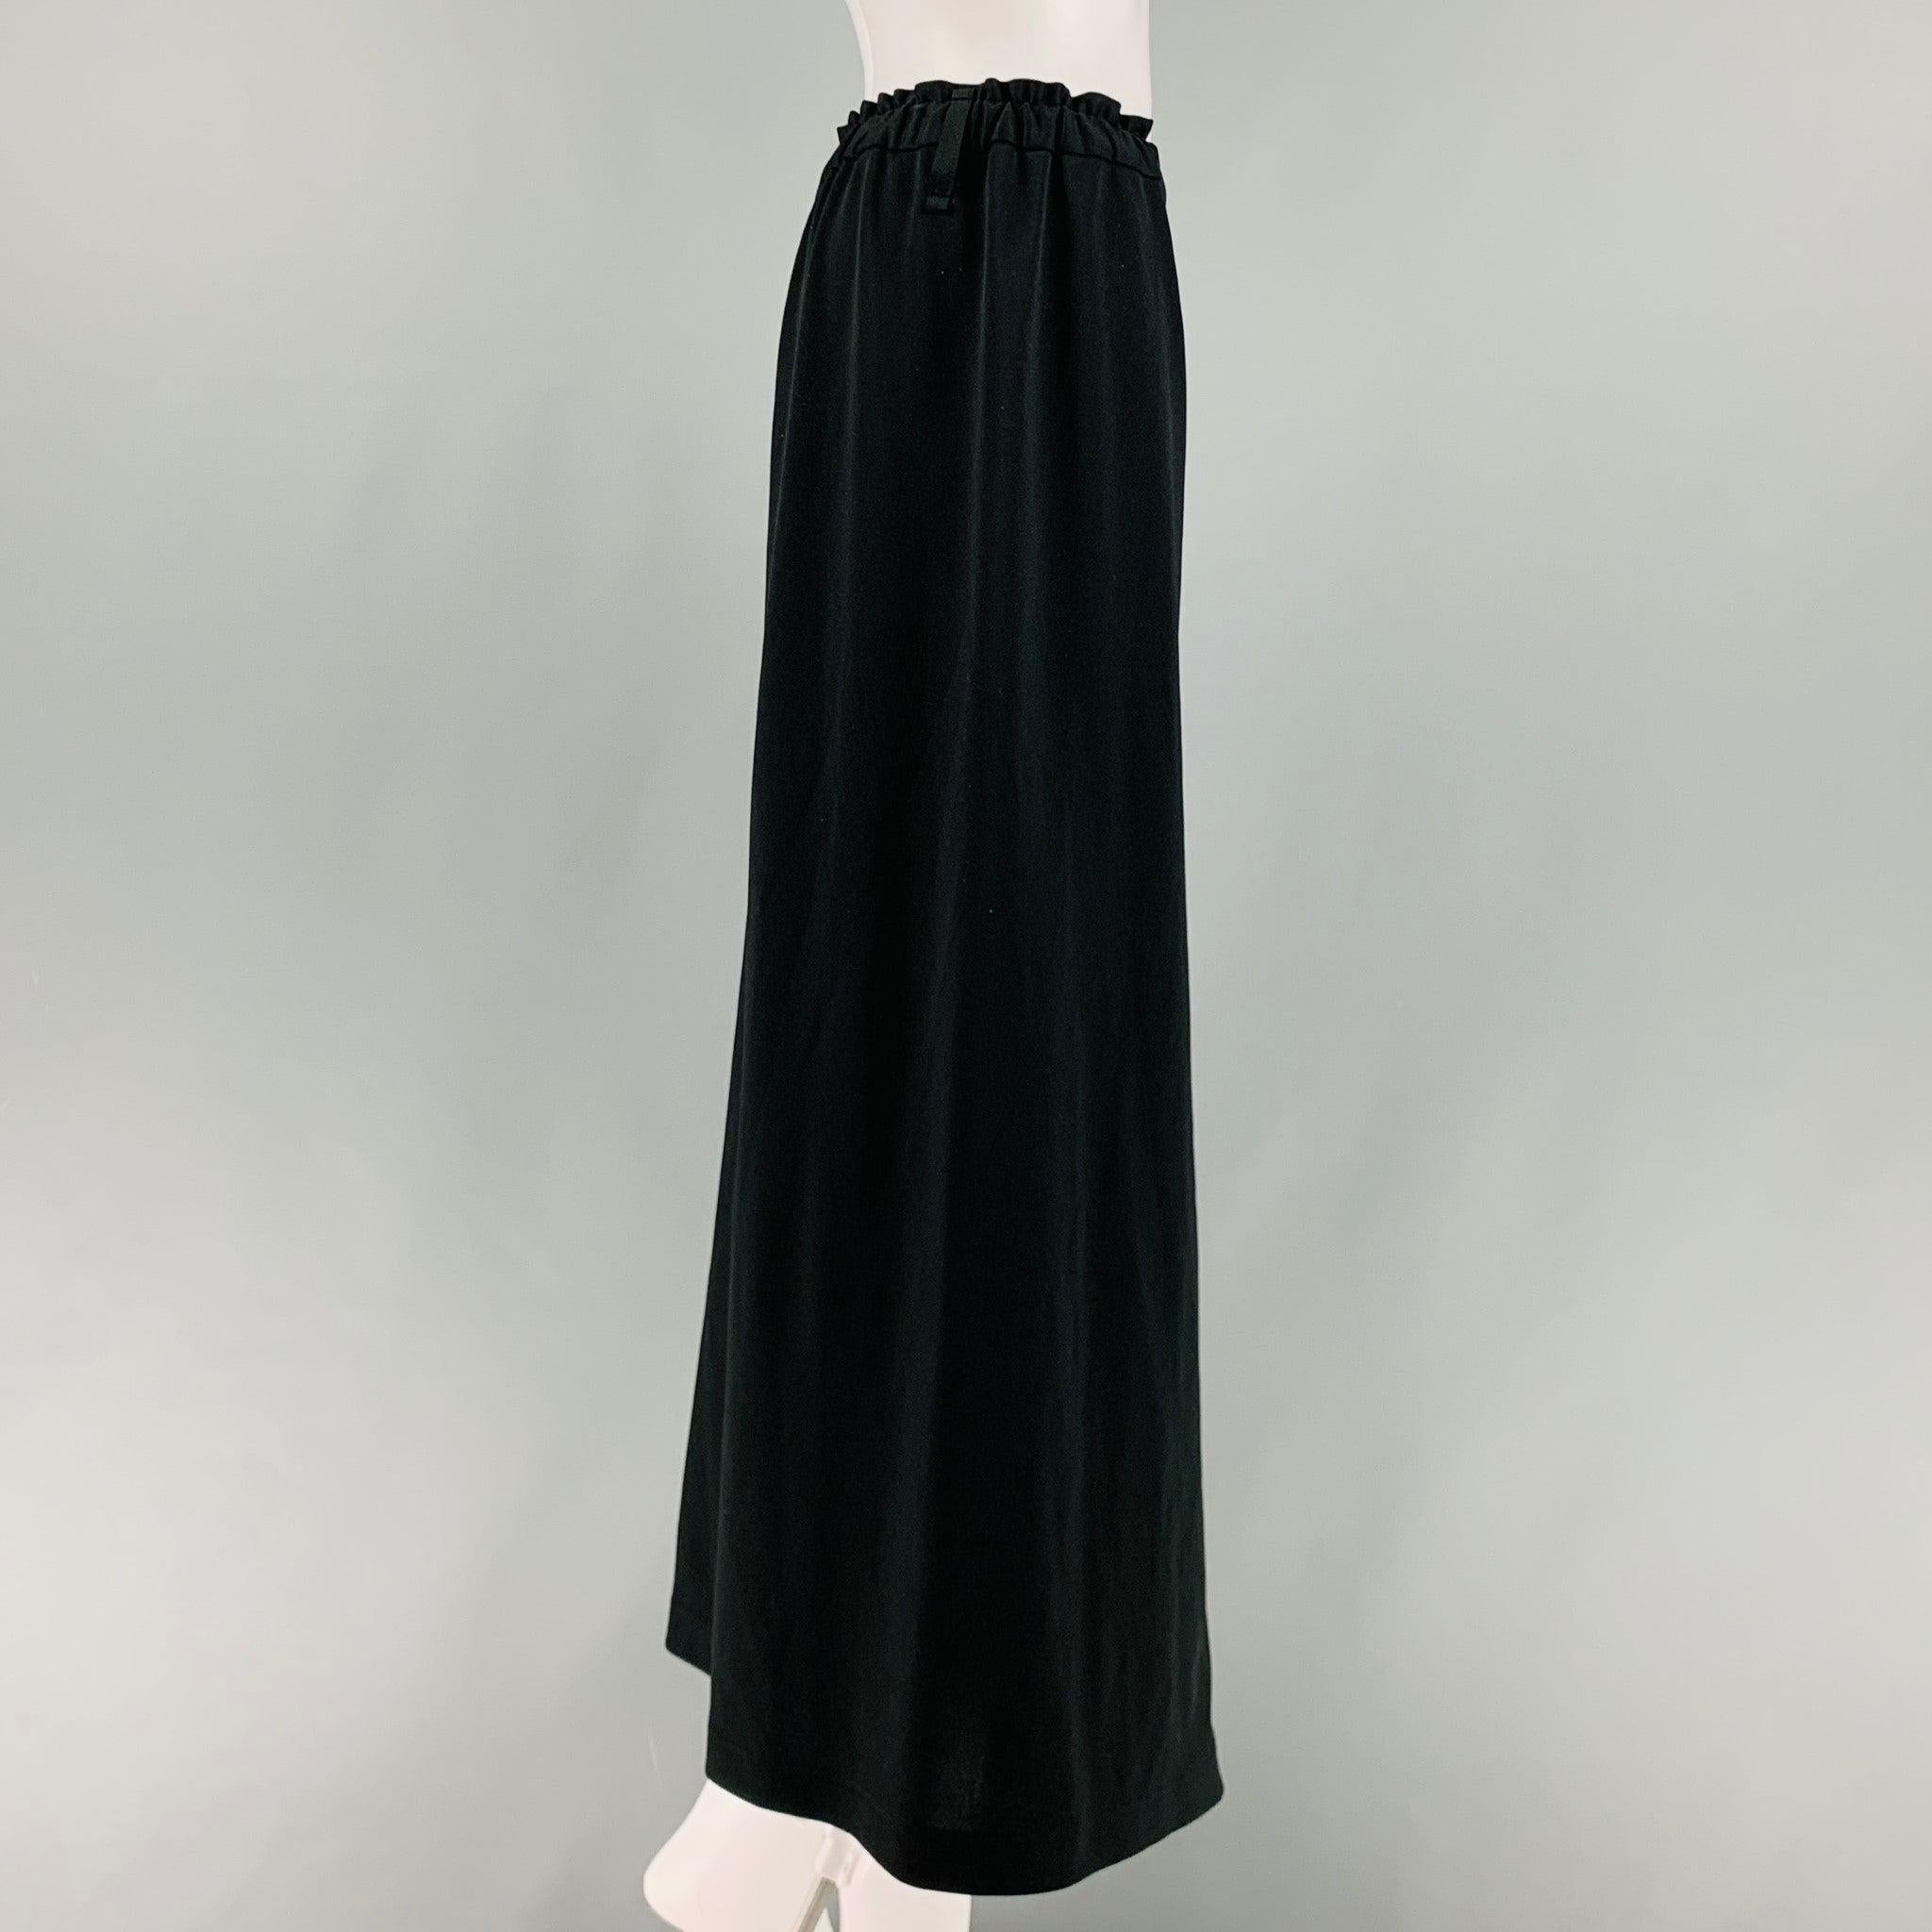 ISSEY MIYAKE casual pants comes in a black jersey knit featuring a drop-crotch style, skirt style pant 132 5, elastic waistband, and a button fly closure. Made in Japan.Excellent Pre-Owned Condition.  

Marked:   2 

Measurements: 
  Waist: 29